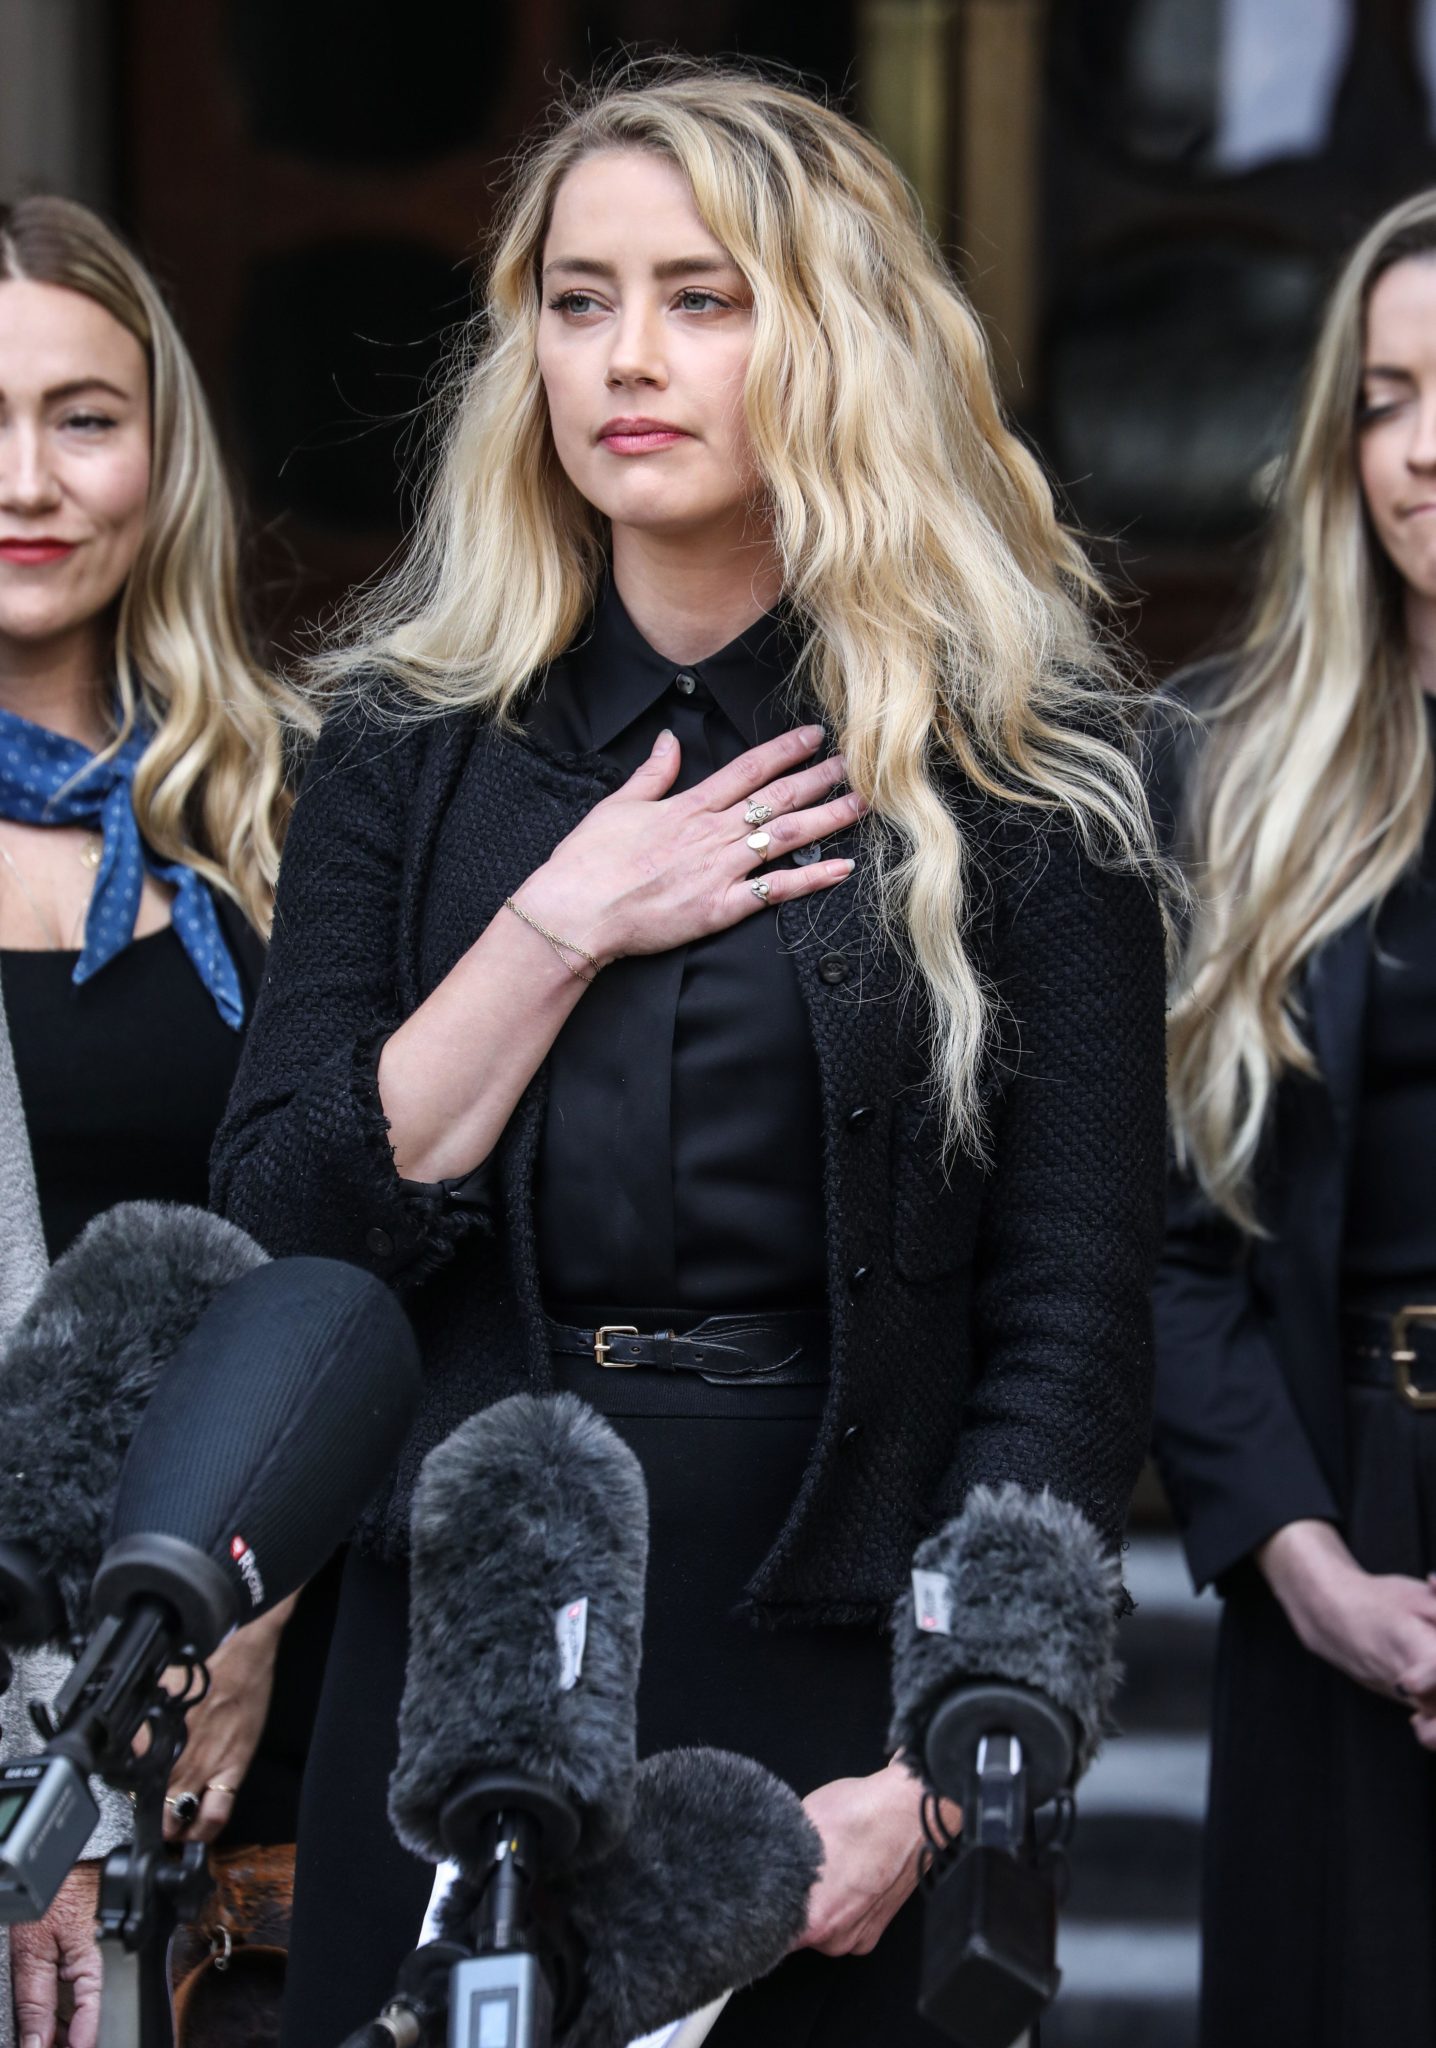 Amber Heard gives a statement outside the Royal Courts of Justice in London on the final day of the firs trial.